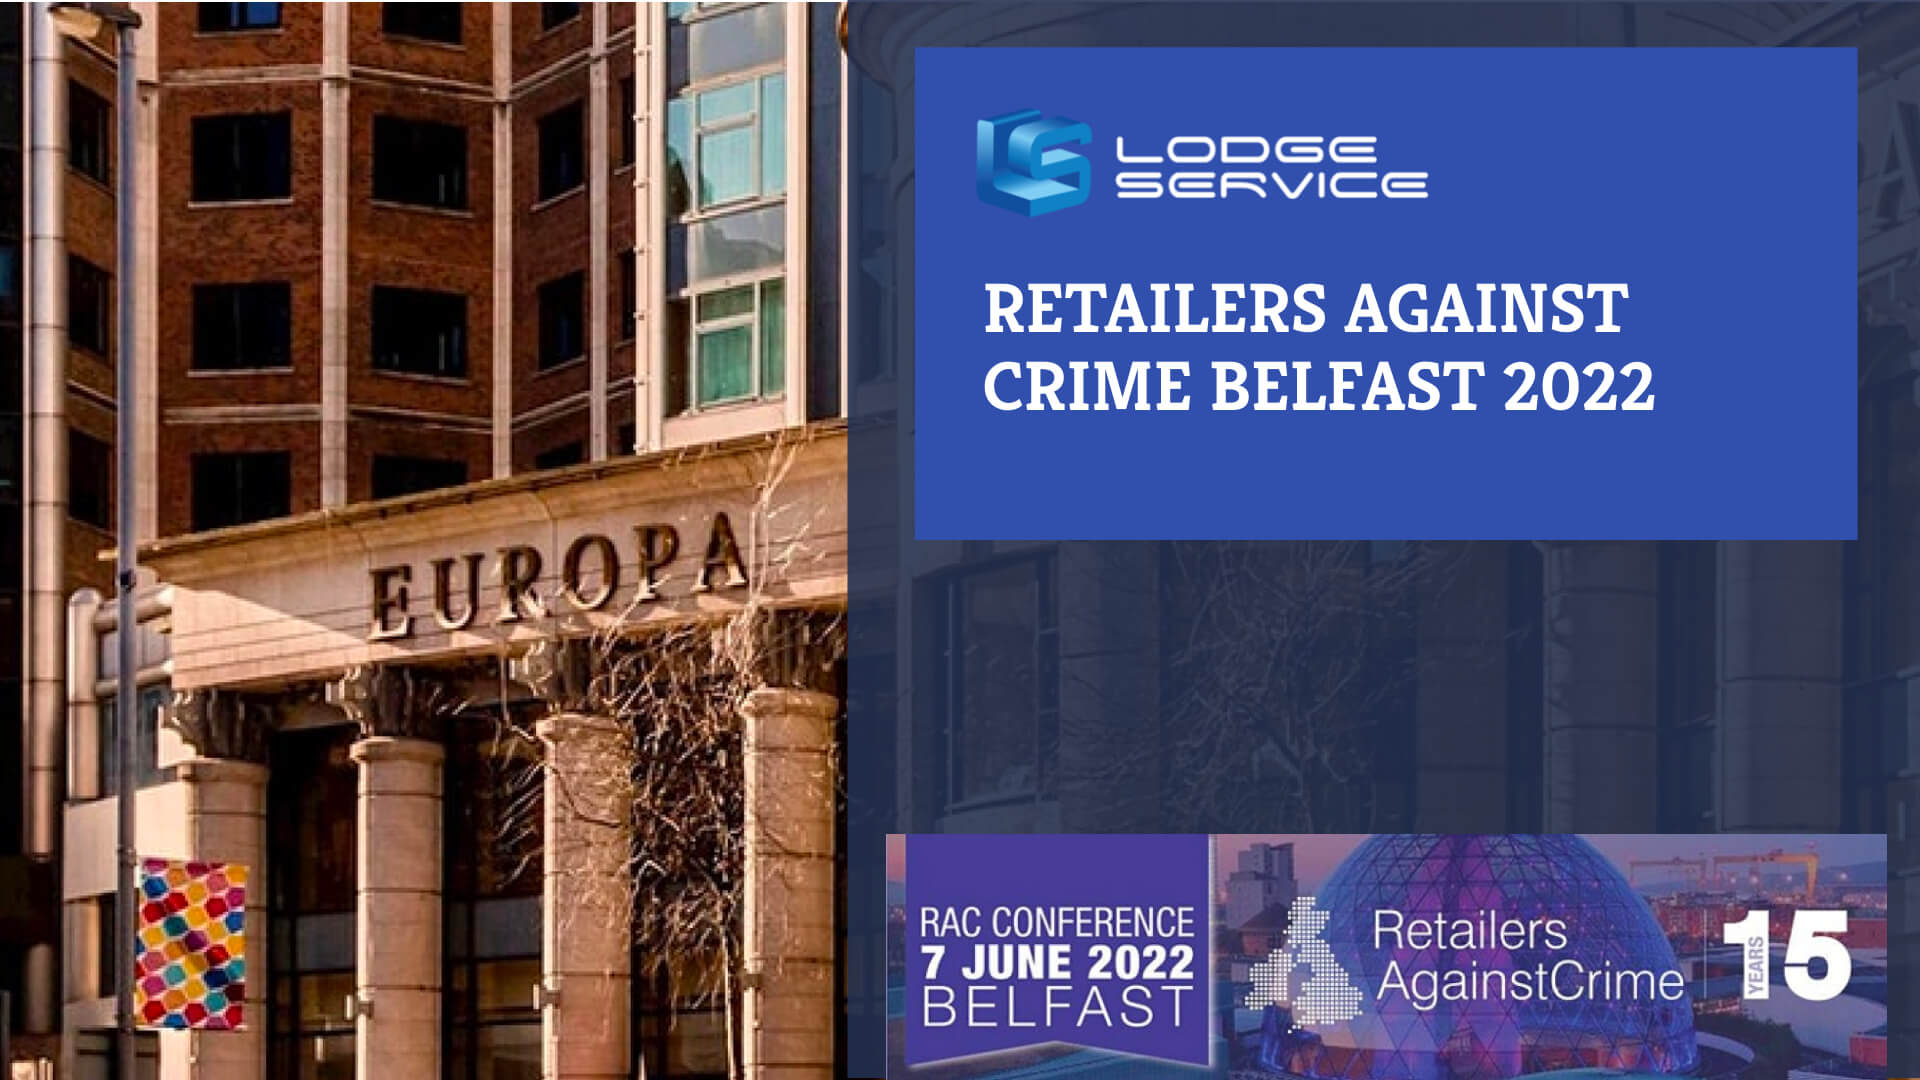 Retailers Against Crime Belfast Conference 2022